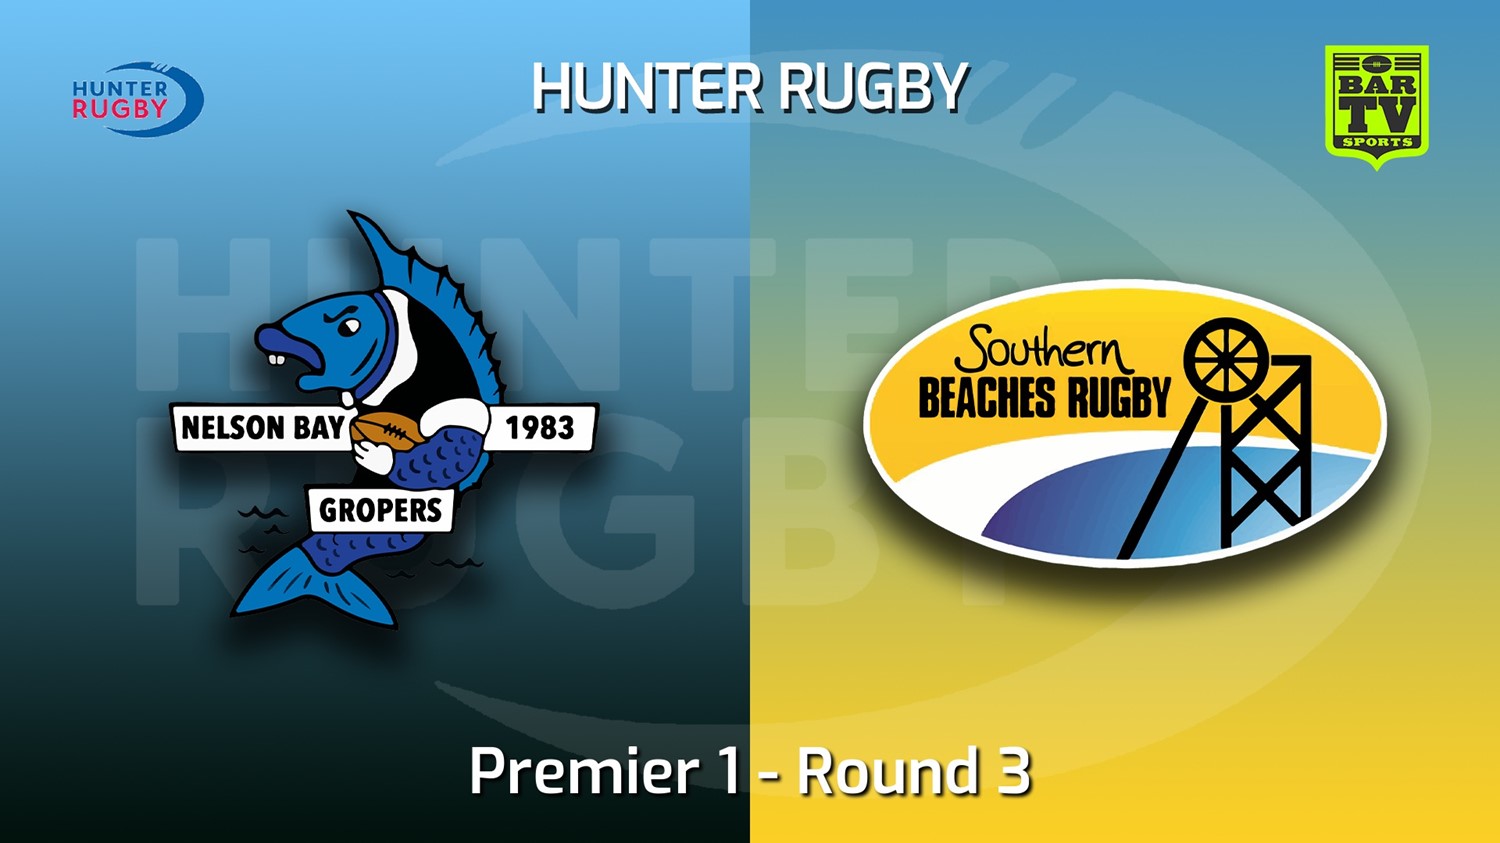 220507-Hunter Rugby Round 3 - Premier 1 - Nelson Bay Gropers v Southern Beaches Slate Image